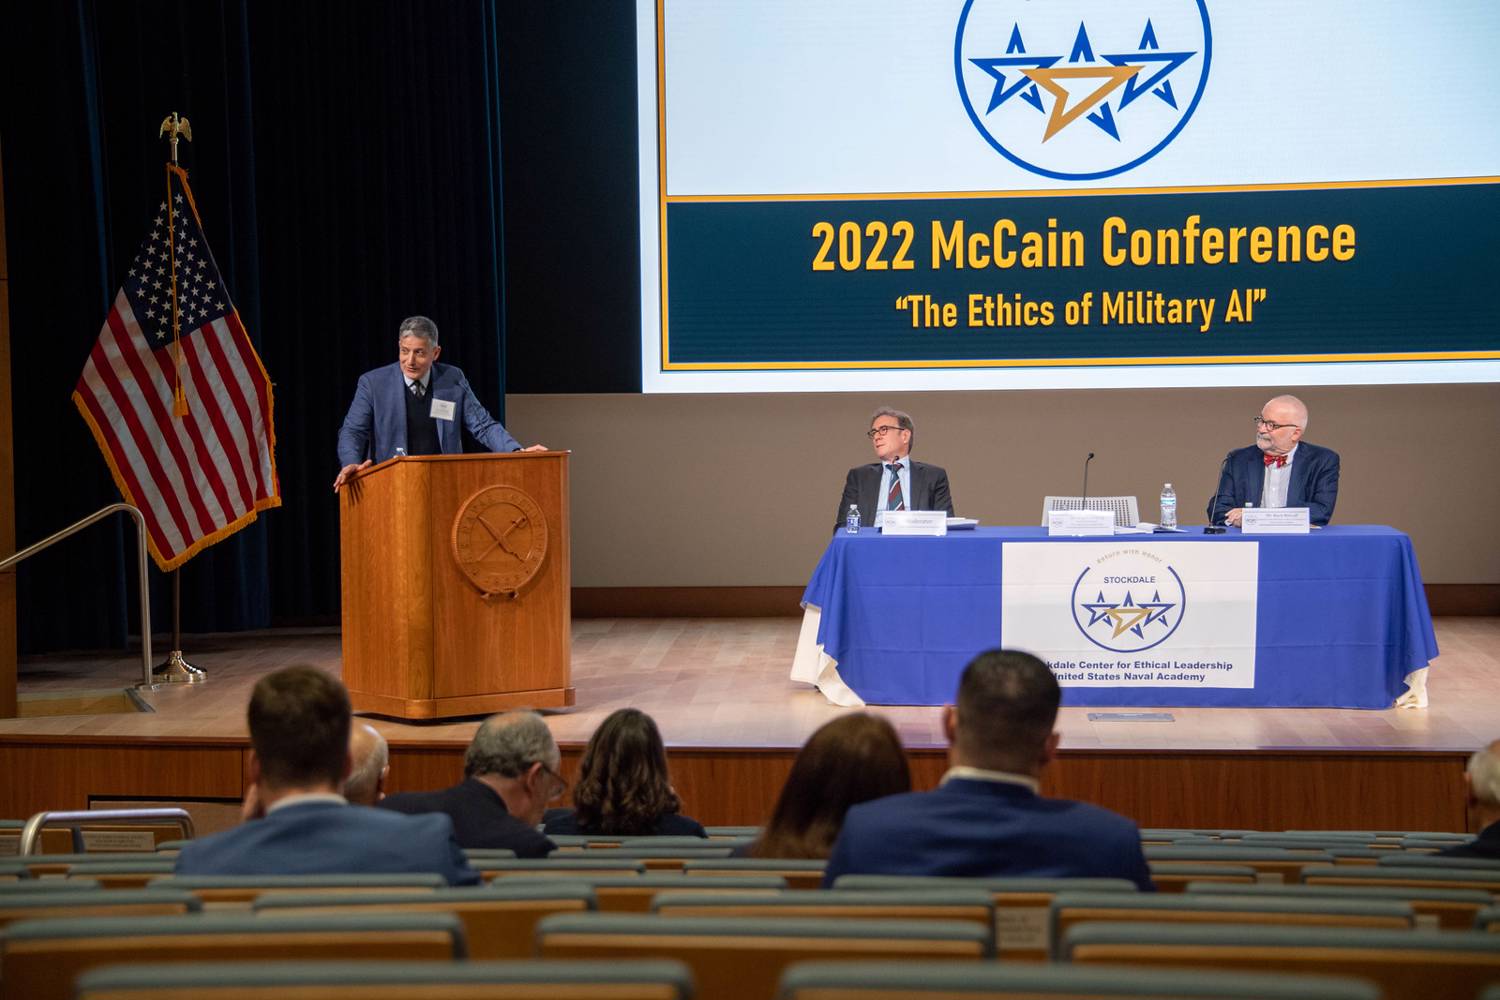 Greg Reichberg speaks at 2022 McCain Conference. Photo: U.S. Navy / Stacy Godfrey